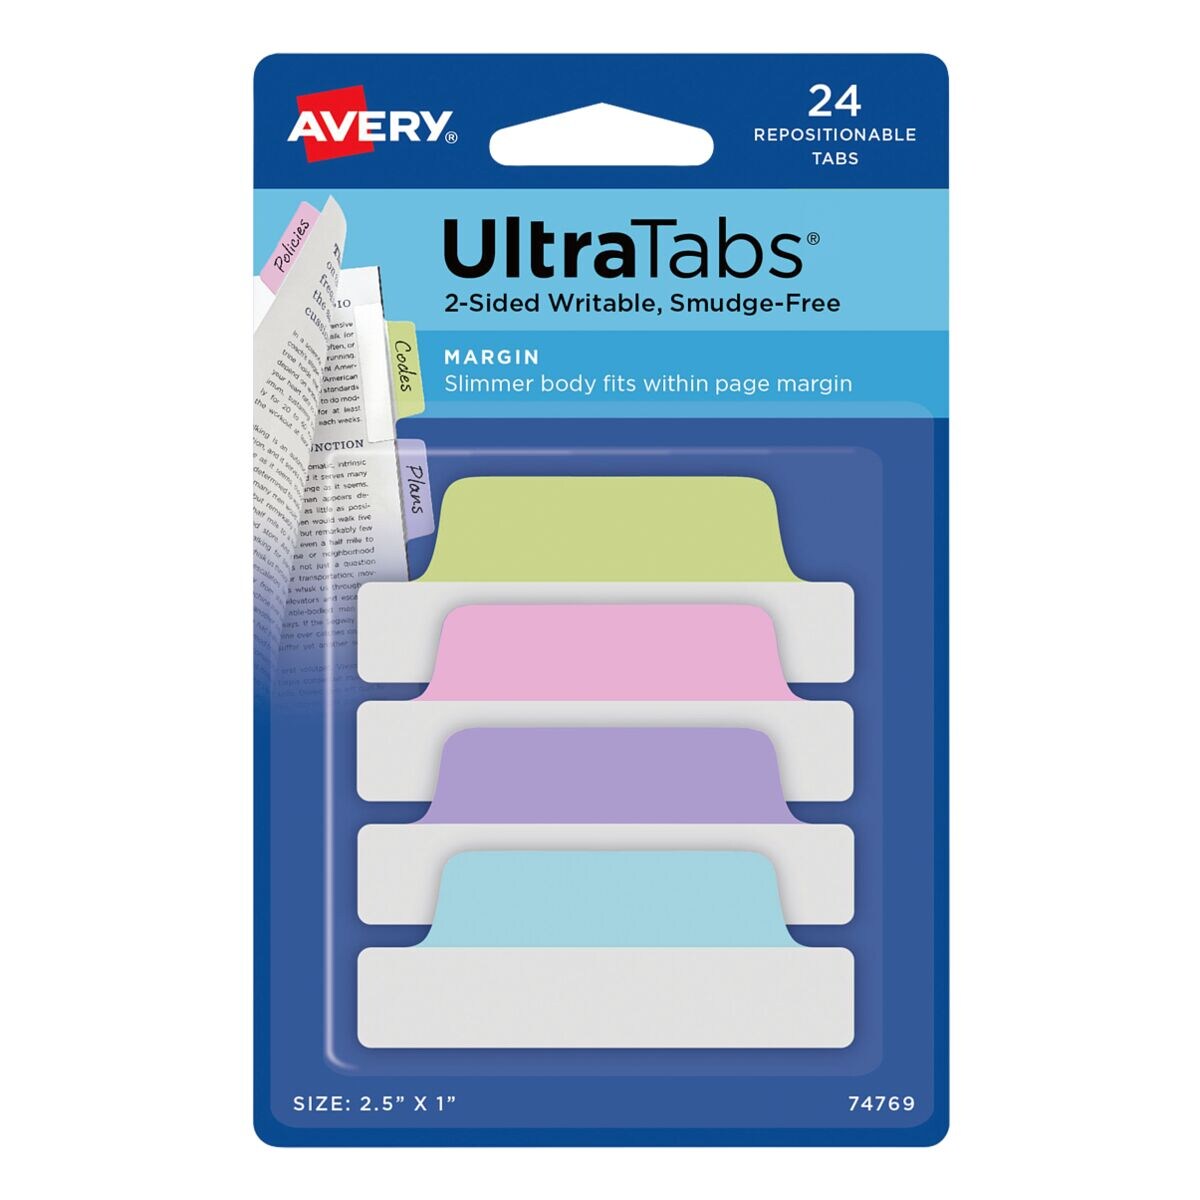 24x Avery Zweckform marque-page repositionnable UltraTabs Pastel 63,5 x 25,4 mm, plastique